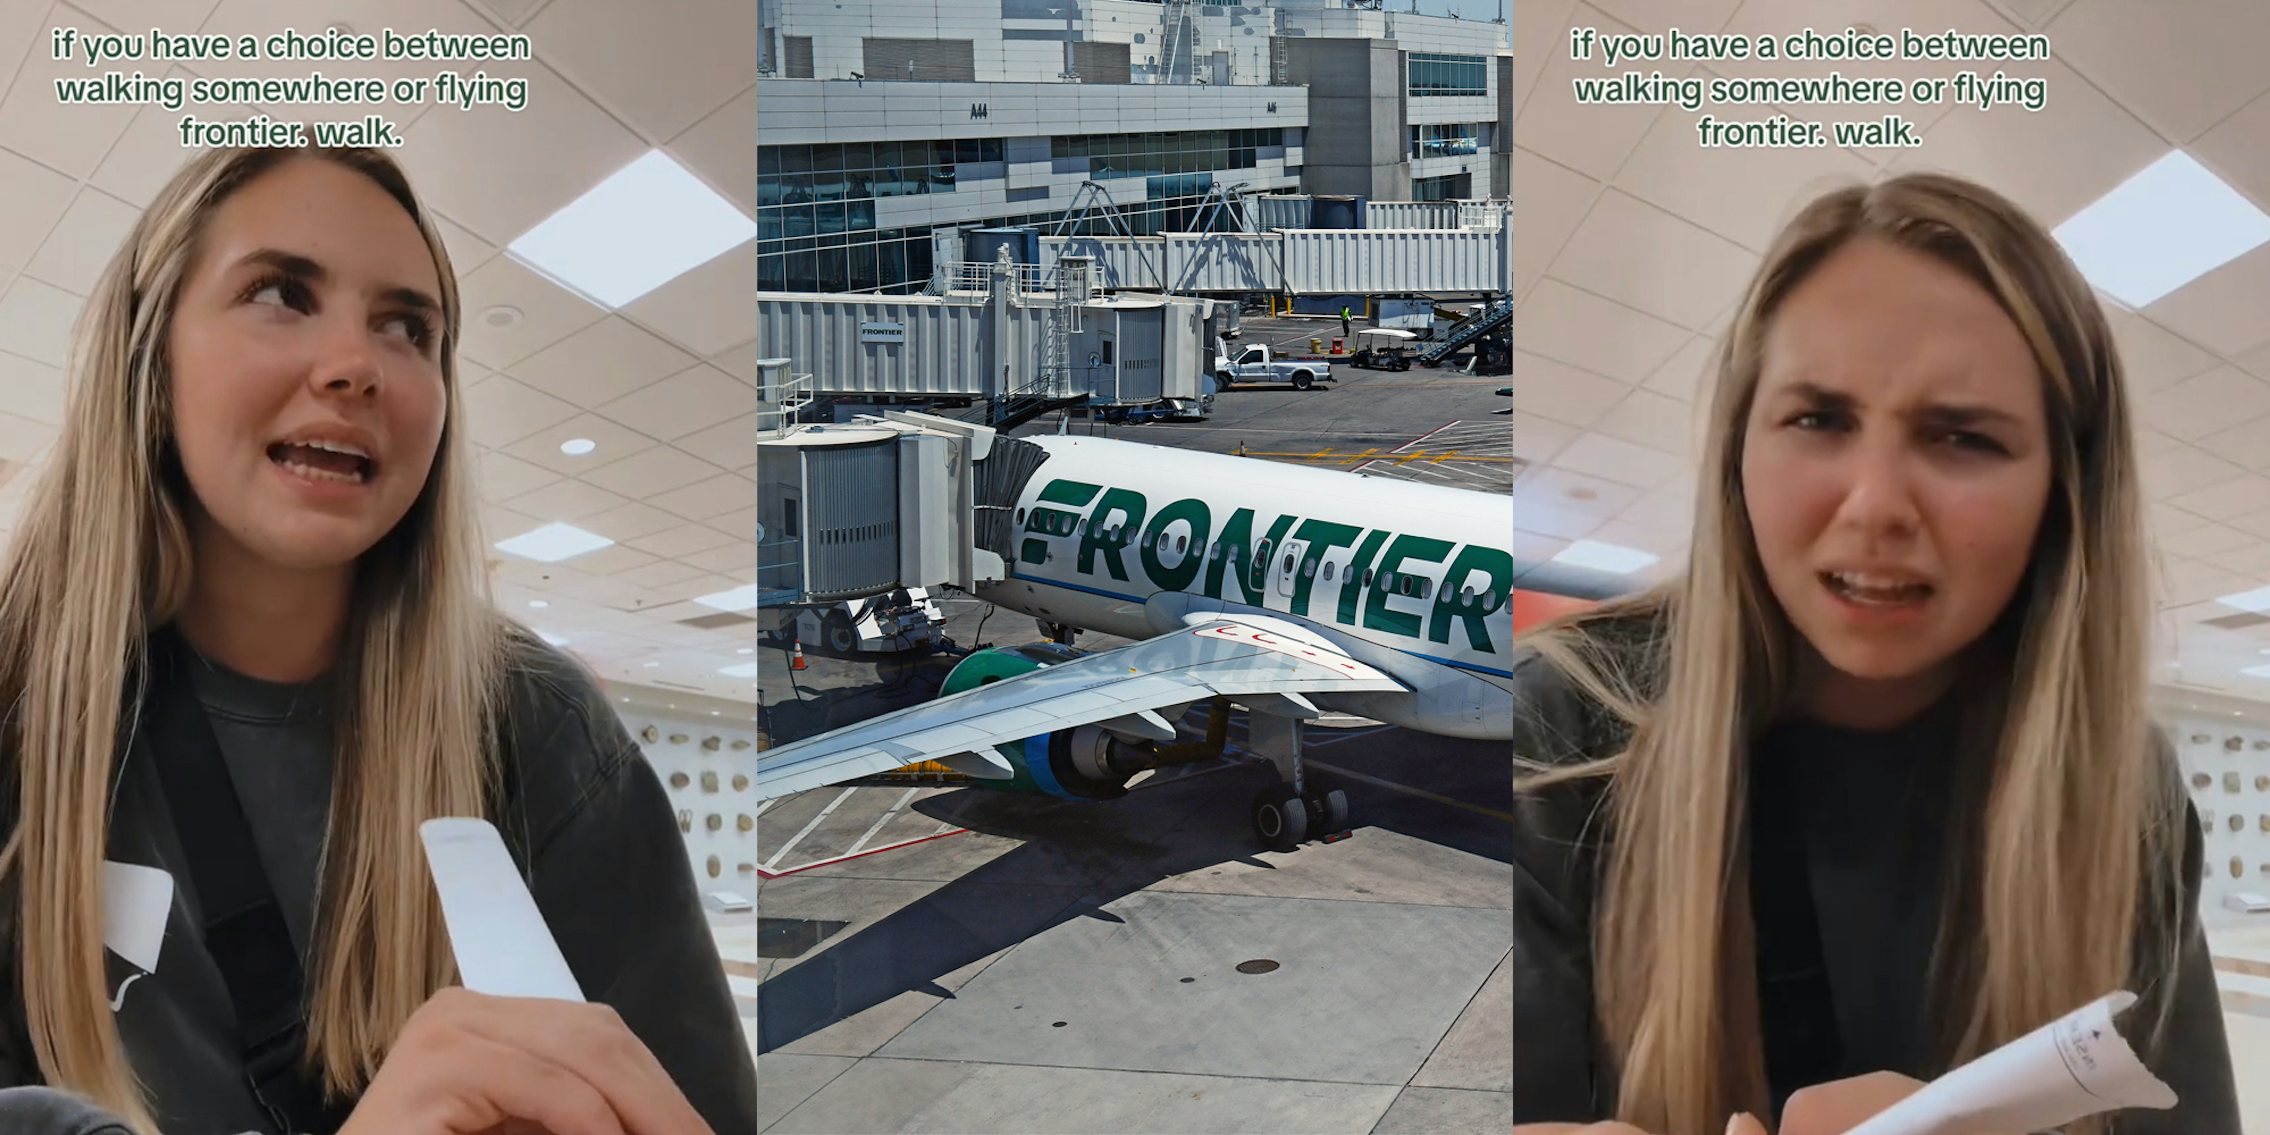 Frontier Airlines passenger speaking with boarding pass with caption 'if you have a choice between walking somewhere or flying frontier, walk.' (l) Frontier plane in runway (c) Frontier Airlines passenger speaking with boarding pass with caption 'if you have a choice between walking somewhere or flying frontier, walk.' (r)